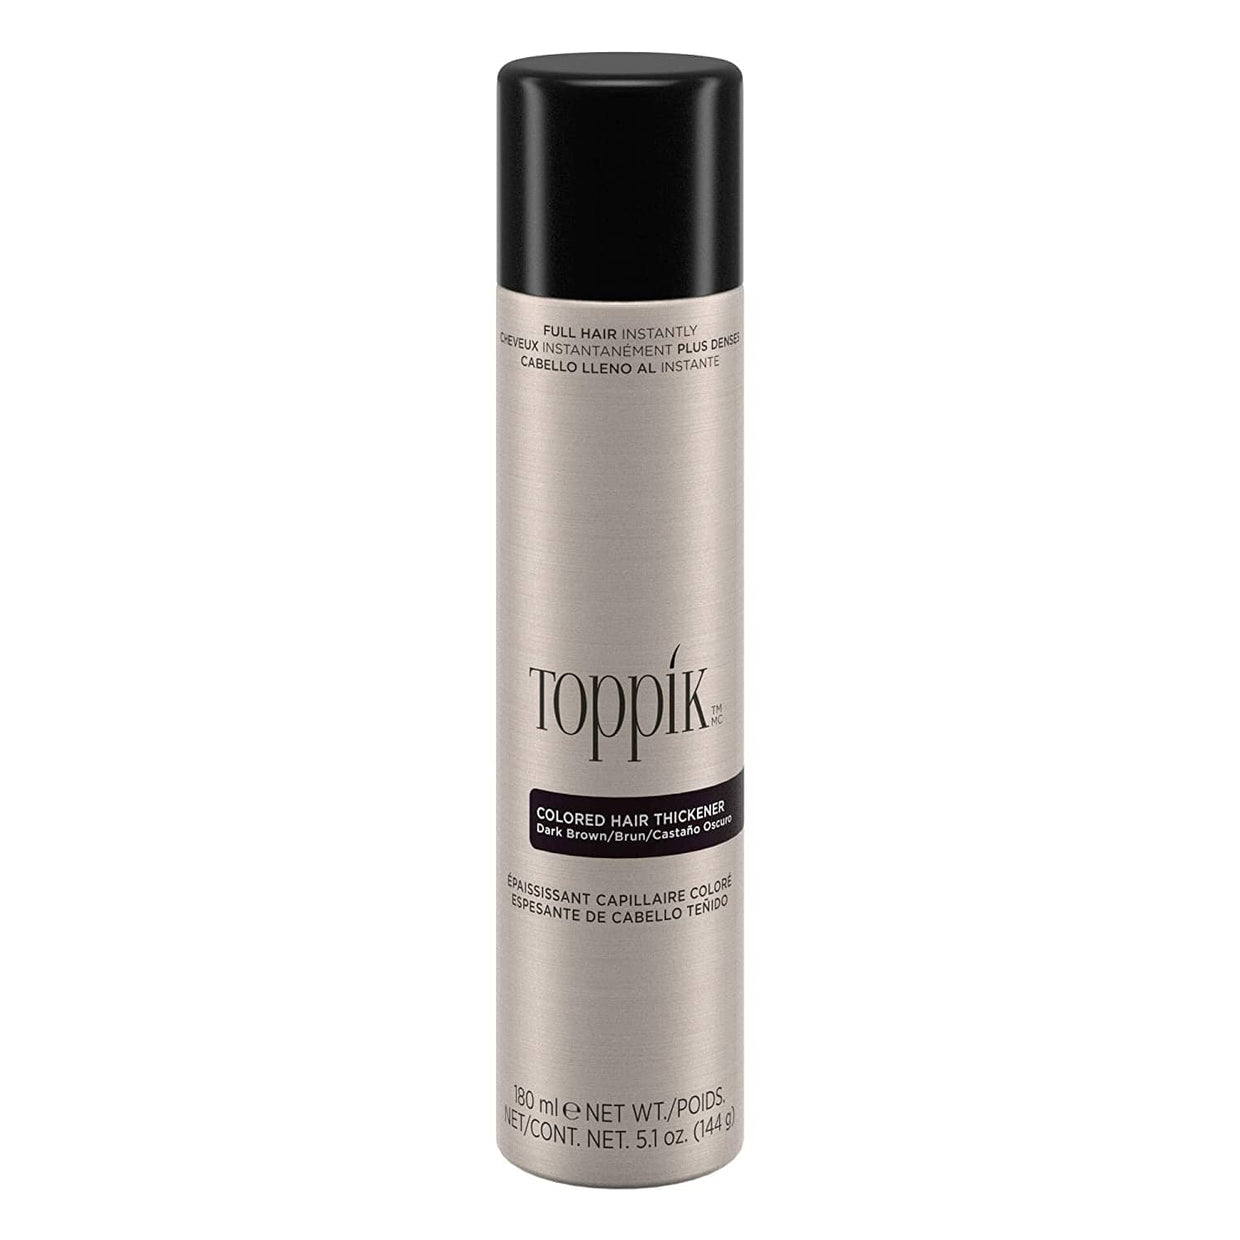 Toppik Colored Hair Thickener - DARK BROWN Toppik 5.1 oz/144g bottle Shop at Exclusive Beauty Club